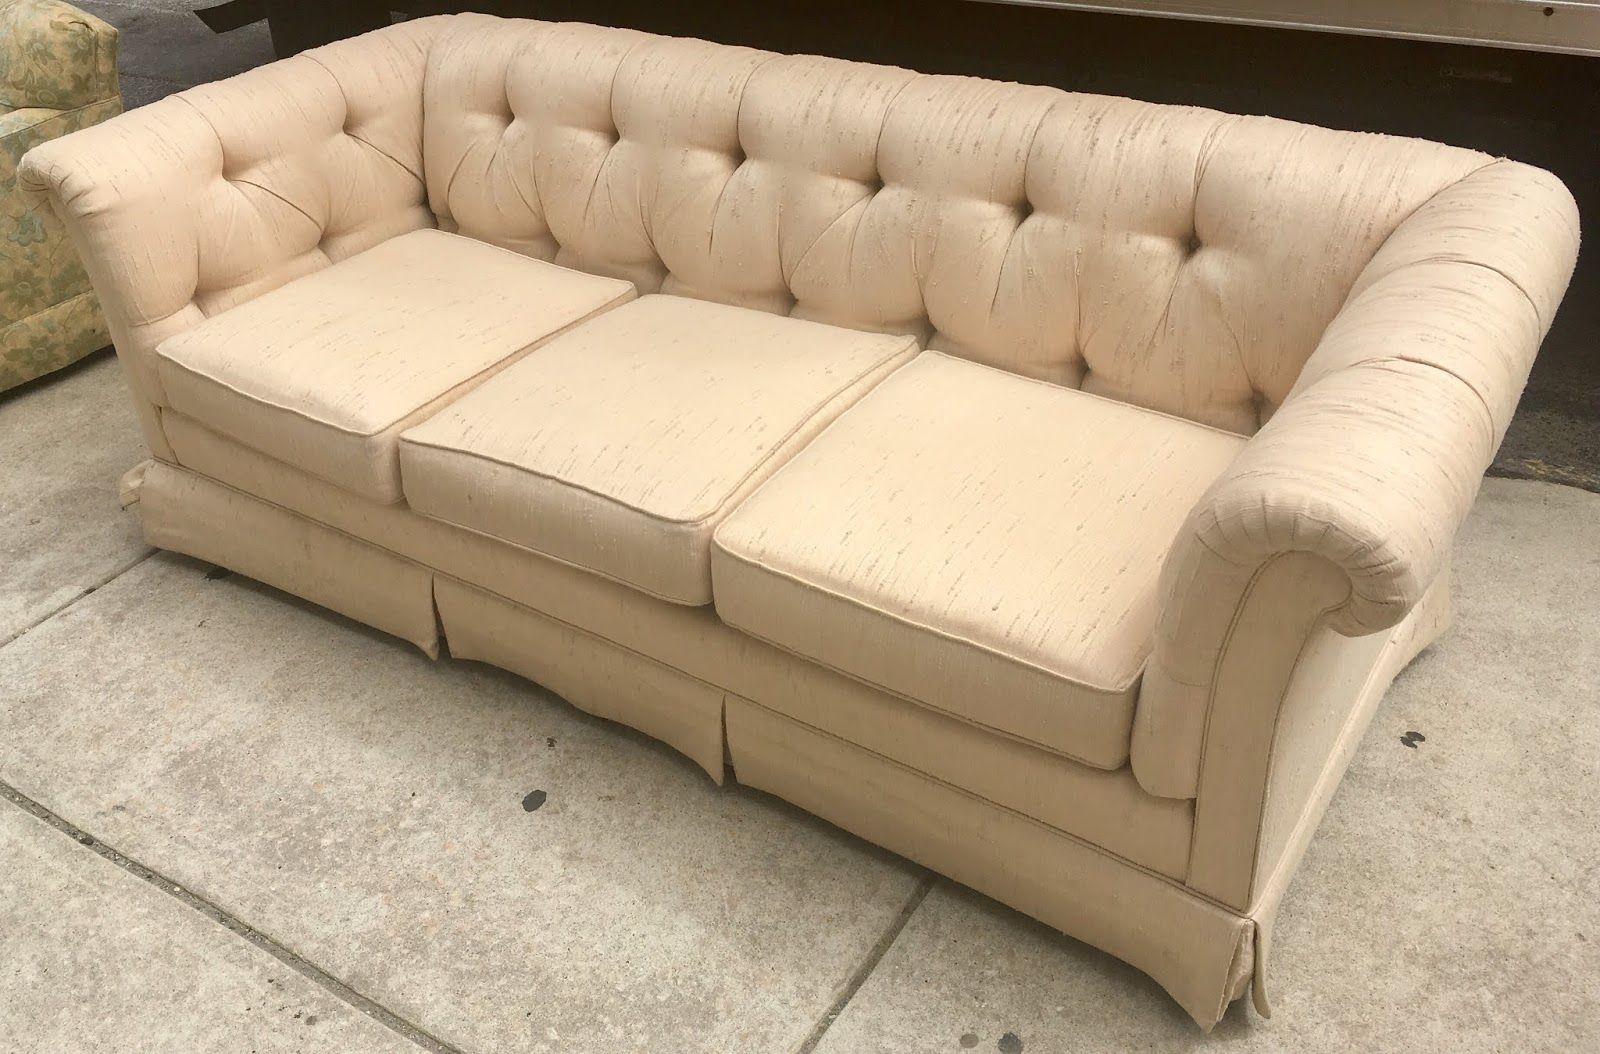 Uhuru Furniture & Collectibles: Beige Sofa With Tufted Throughout Ecru And Otter Coffee Tables (View 1 of 15)